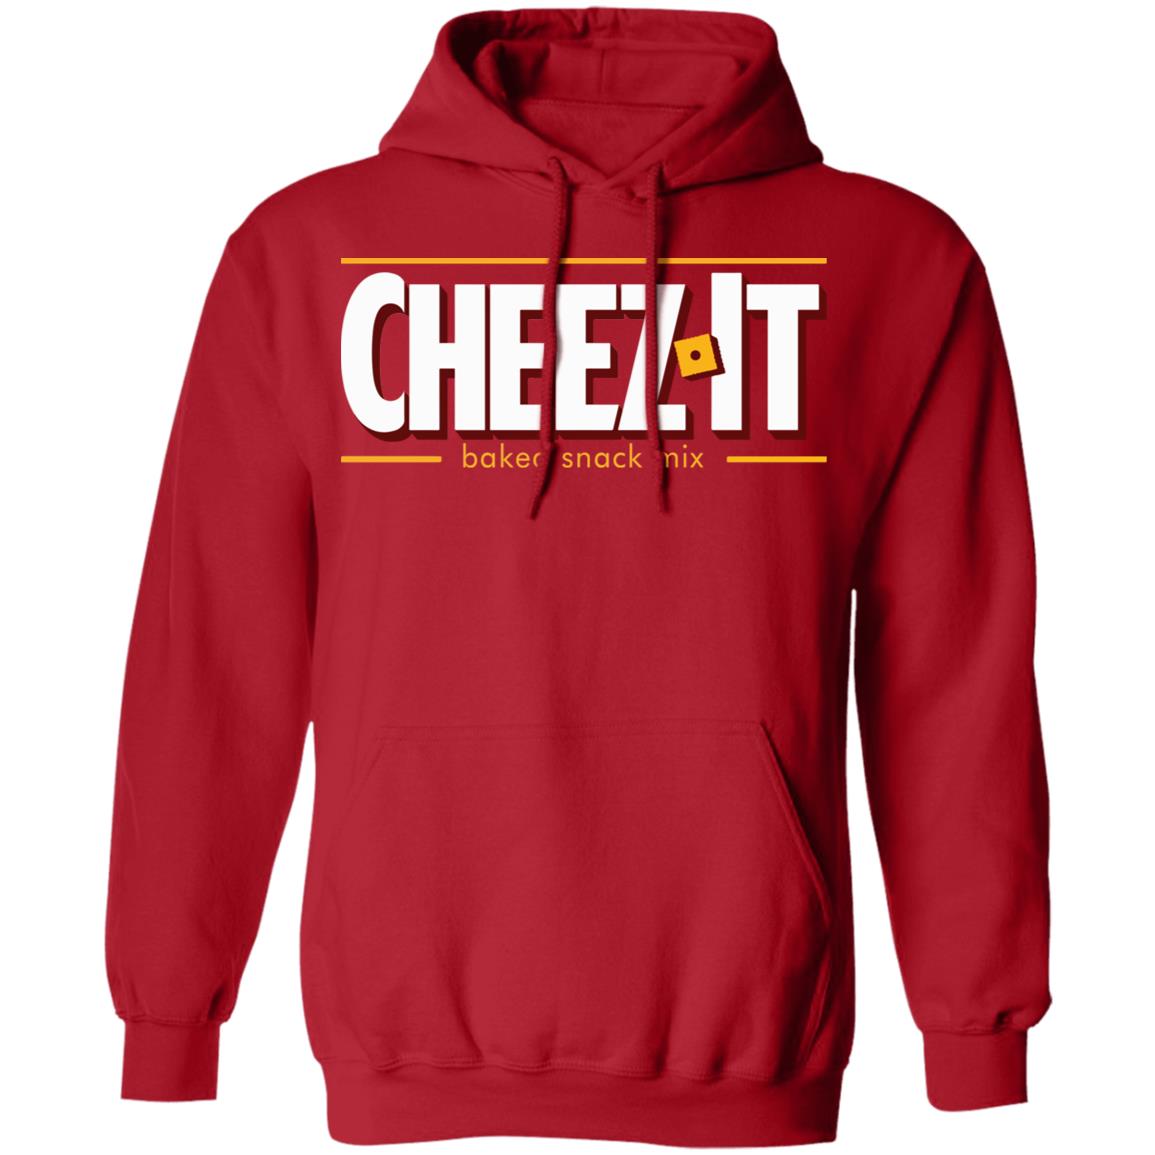 Cheez It Baked Snack Mix Shirt 2